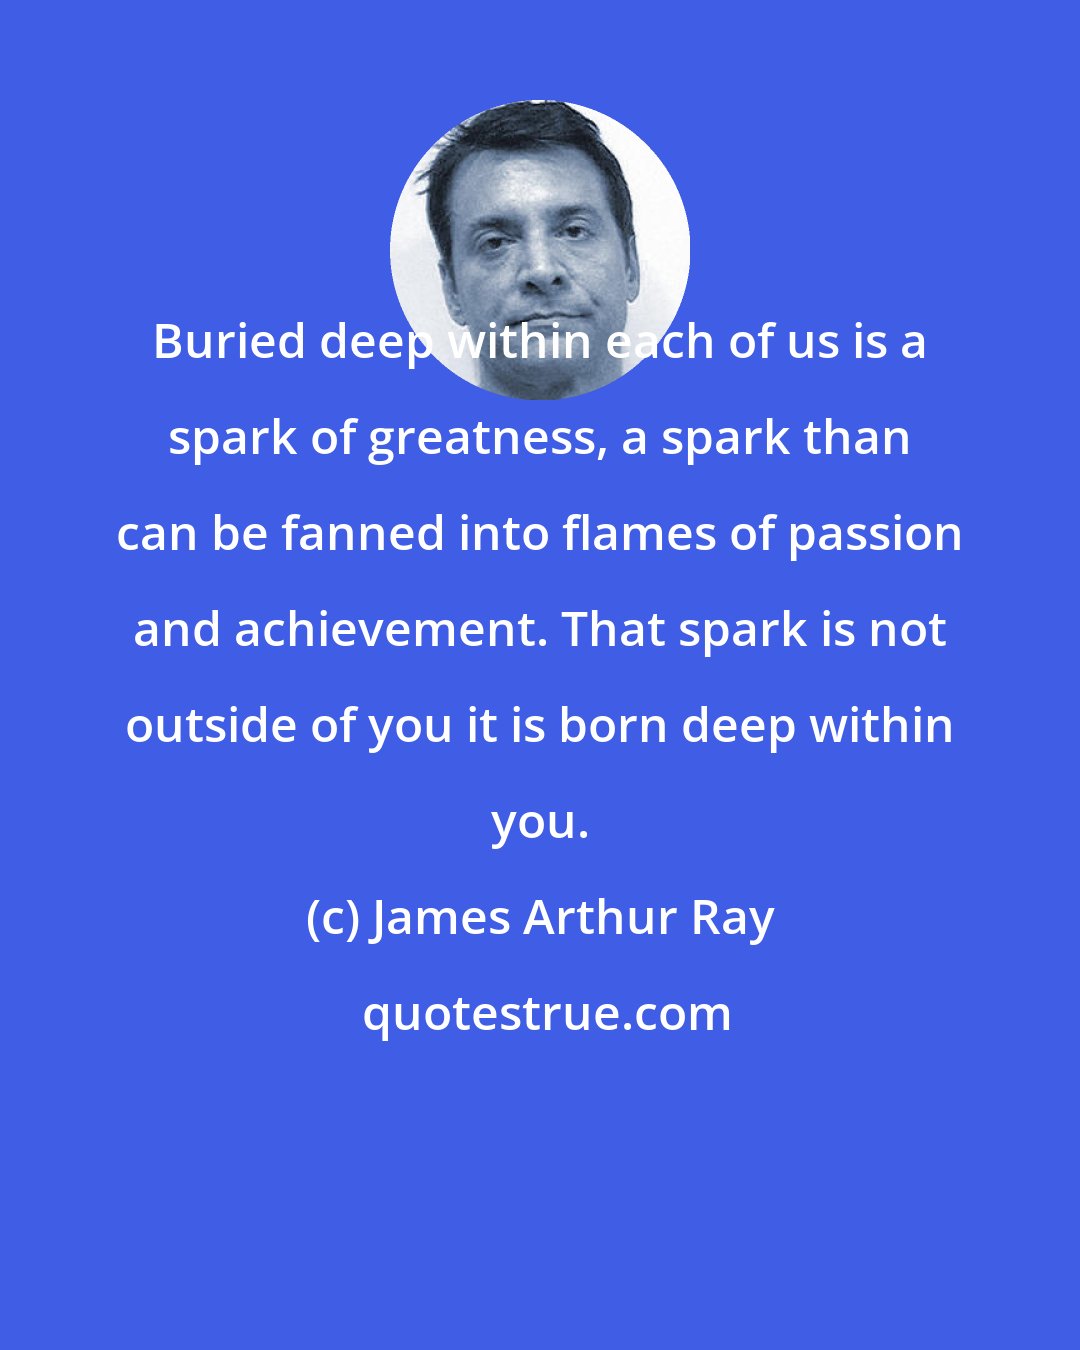 James Arthur Ray: Buried deep within each of us is a spark of greatness, a spark than can be fanned into flames of passion and achievement. That spark is not outside of you it is born deep within you.